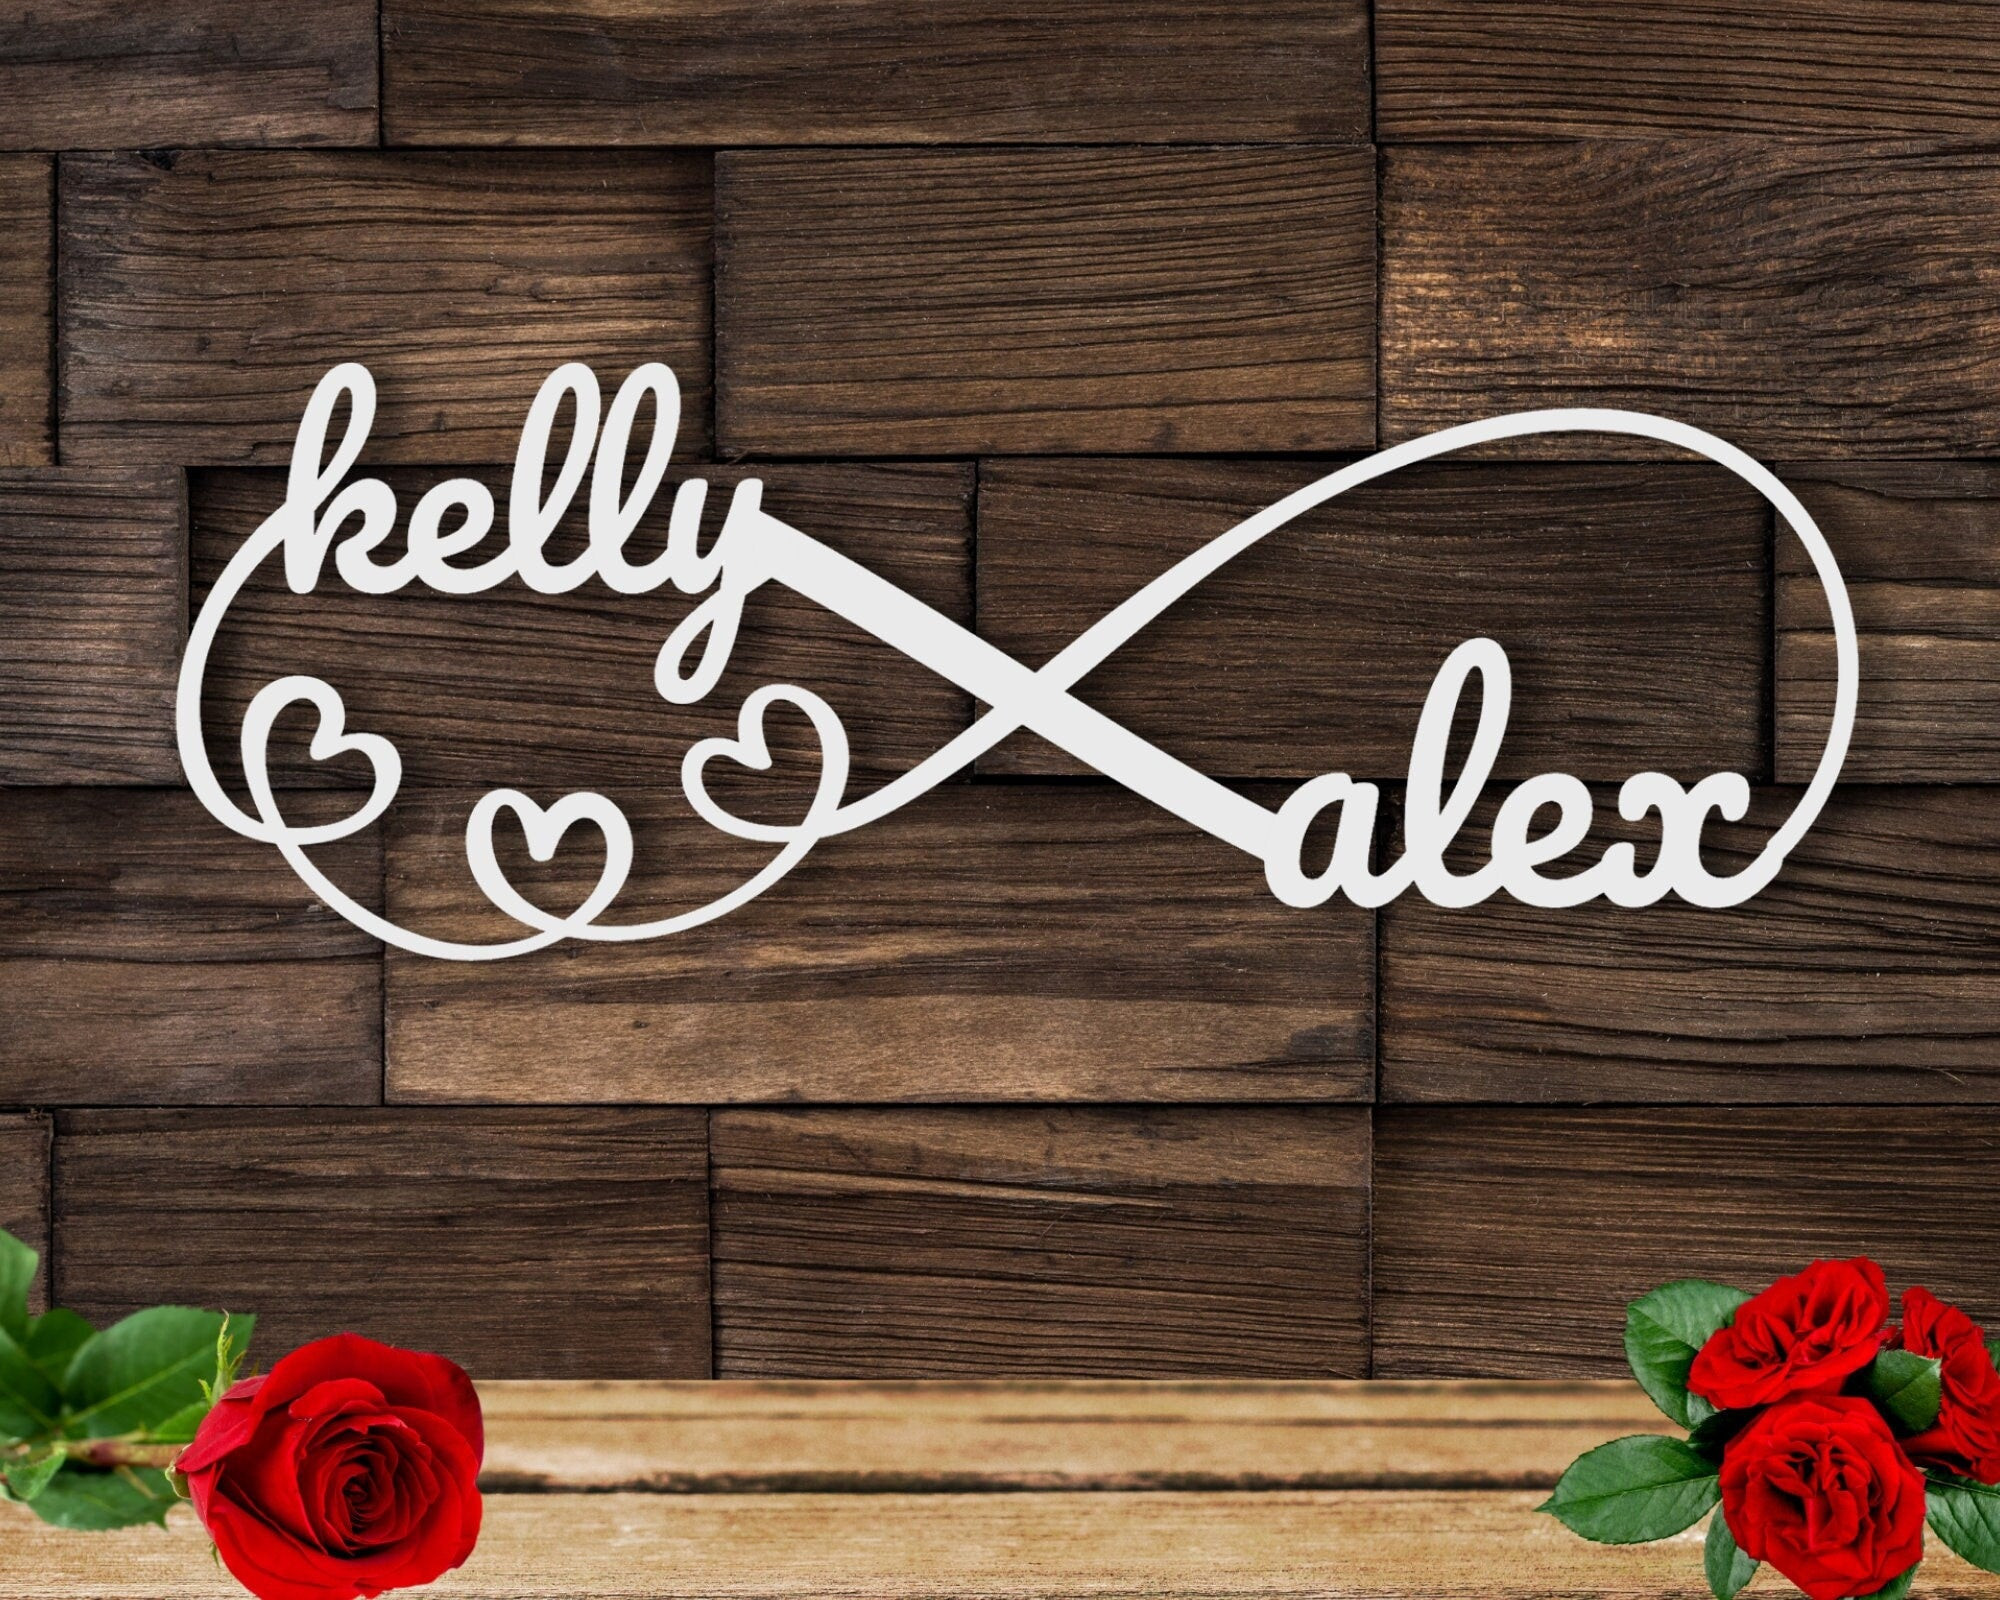 Metal Infinity Name Sign, Infinity Sign With Hearts, Personalized Infinity Sign, Custom Infinity Metal Sign, Infinity Sign Containing Names, Laser Cut Metal Signs Custom Gift Ideas 12x12IN